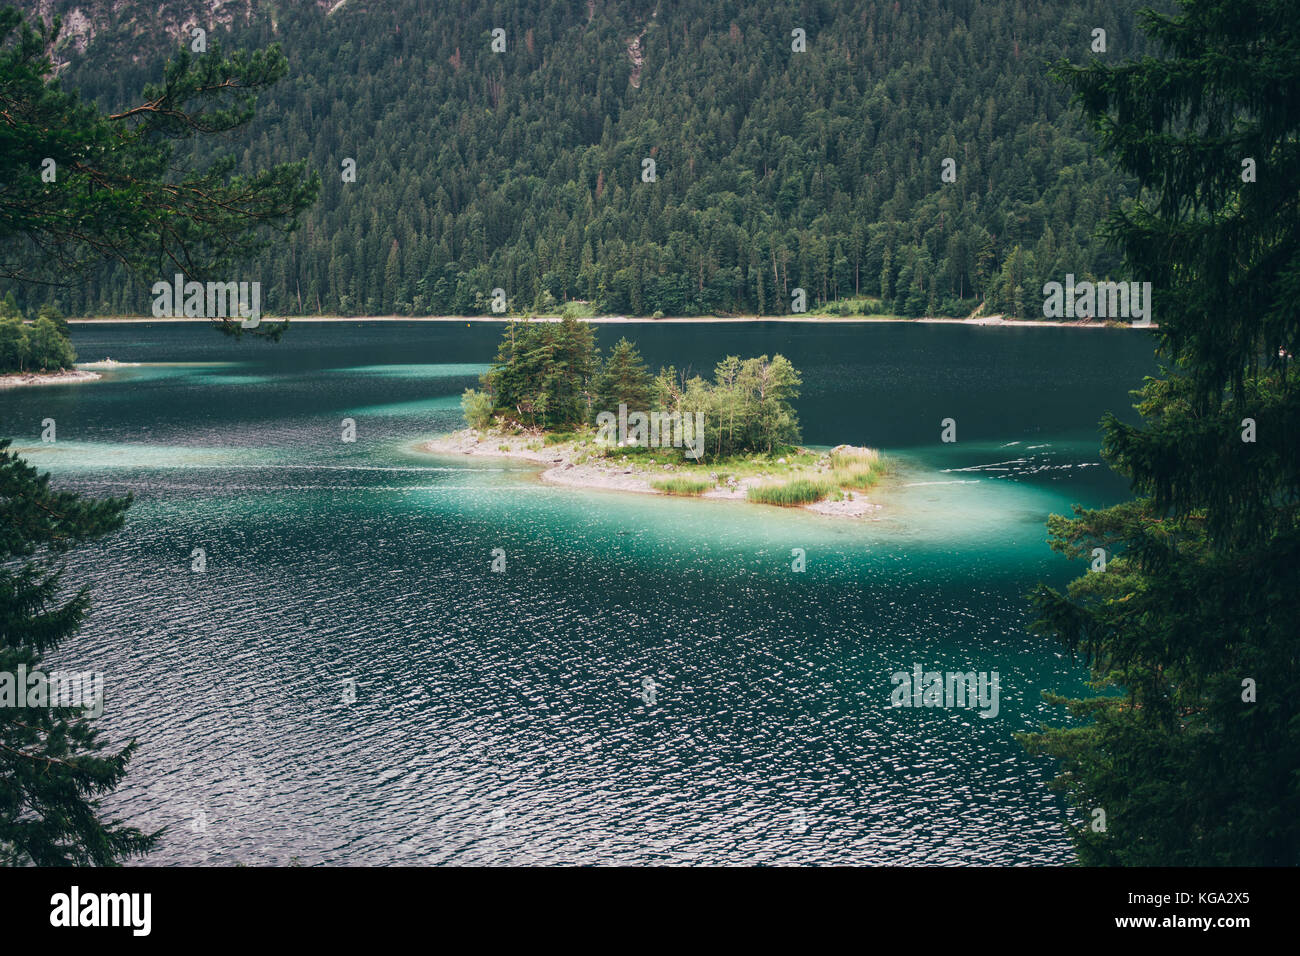 Island with clear blue water on the EIbsee mountain lake in the Alps in Germany. Stock Photo